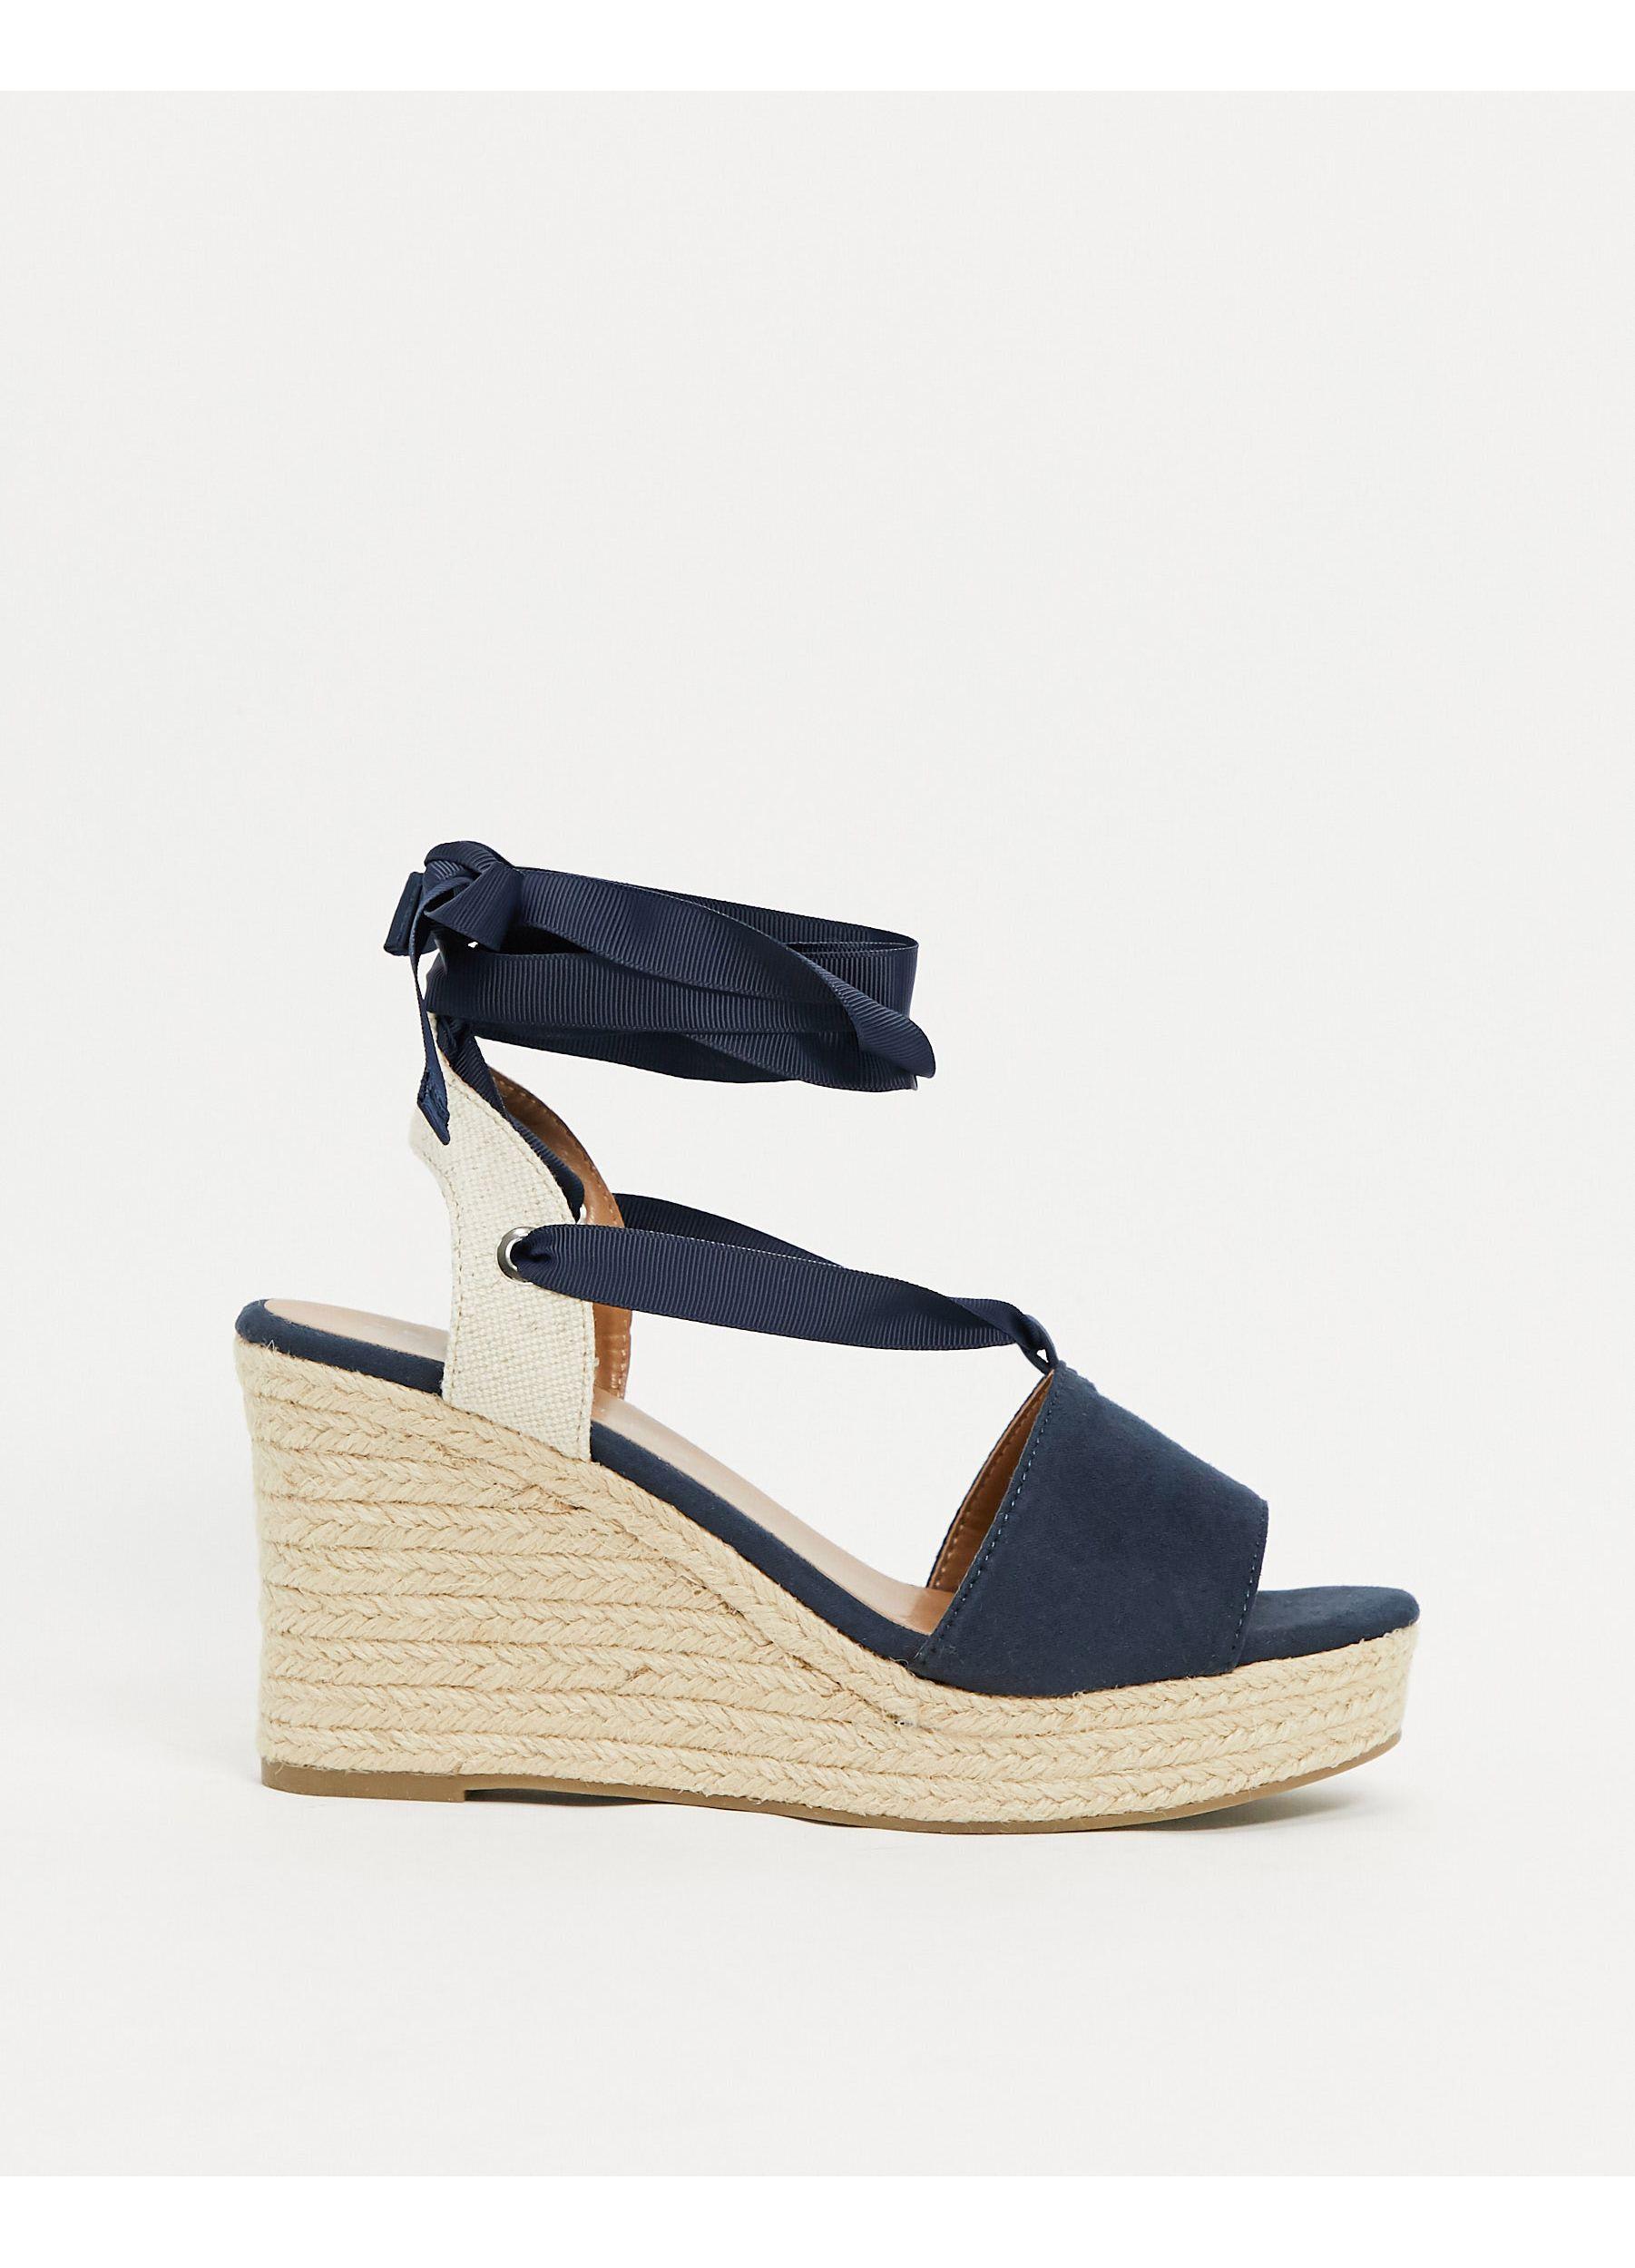 South Beach Espadrille Wedges in (Blue) - Lyst